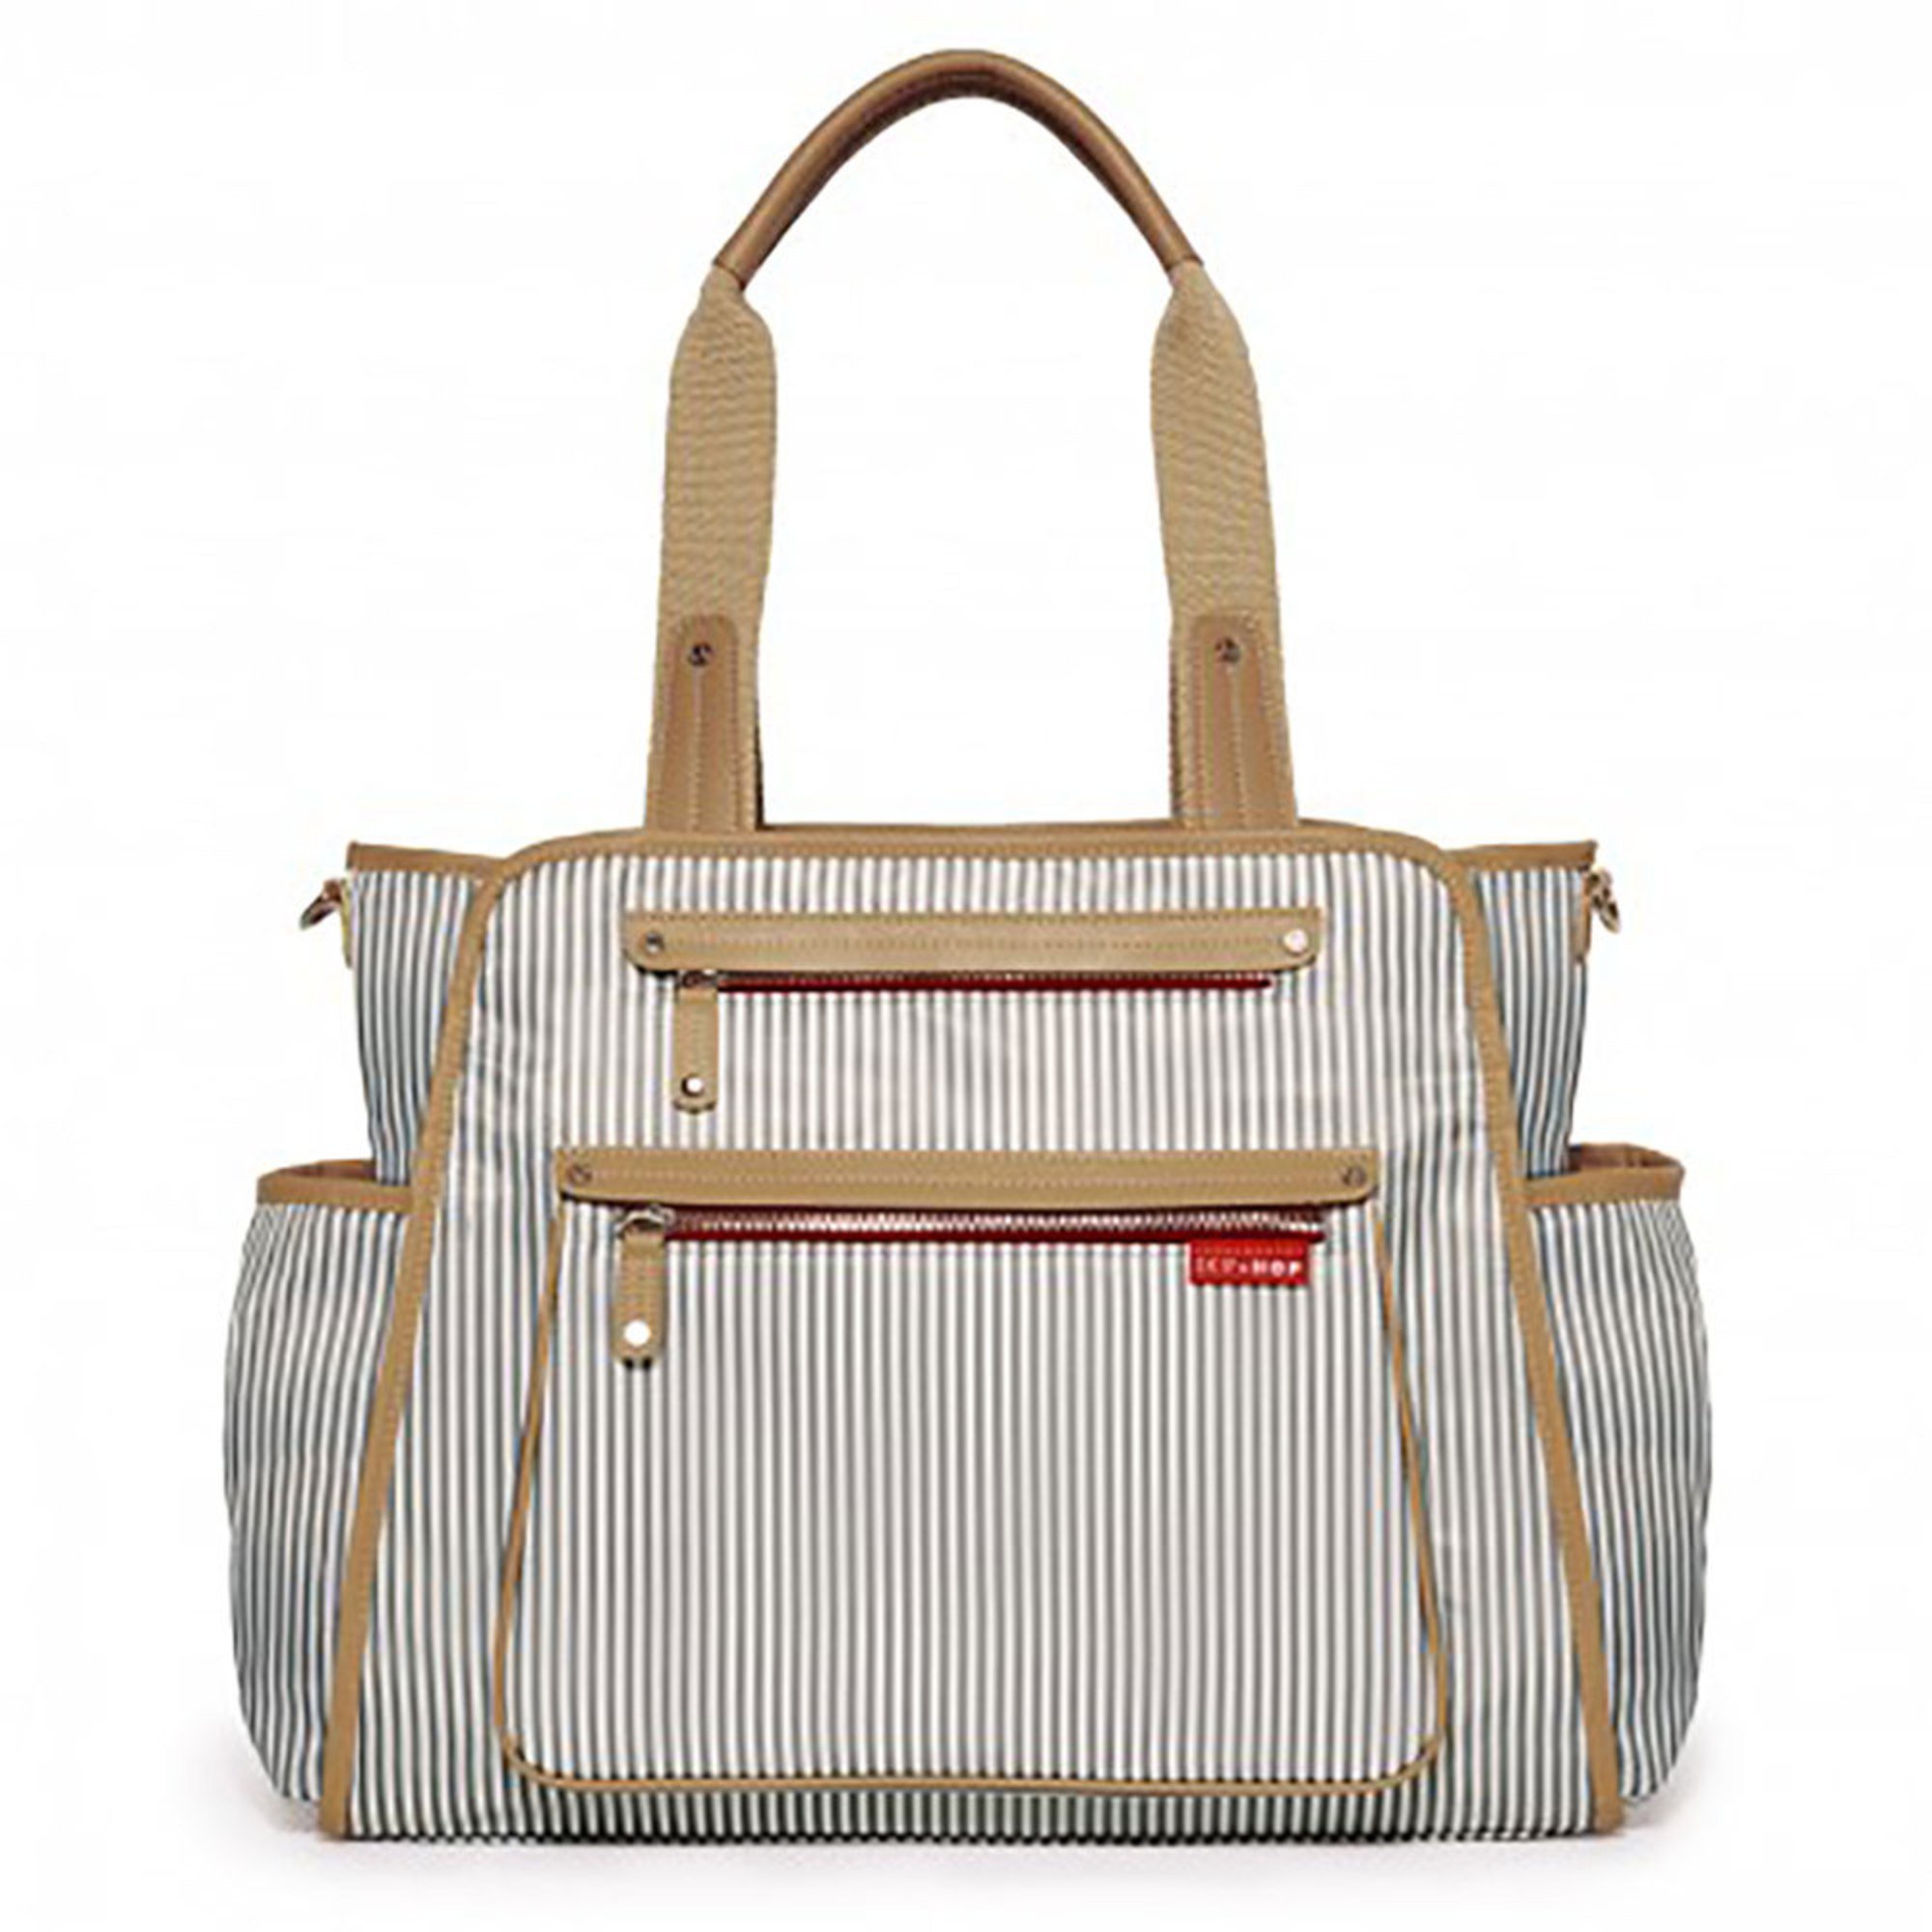 Skip Hop Grand Central Diaper Bag, French Stripe | Totes | Baby, Kids & Toys - Shop Your Navy ...